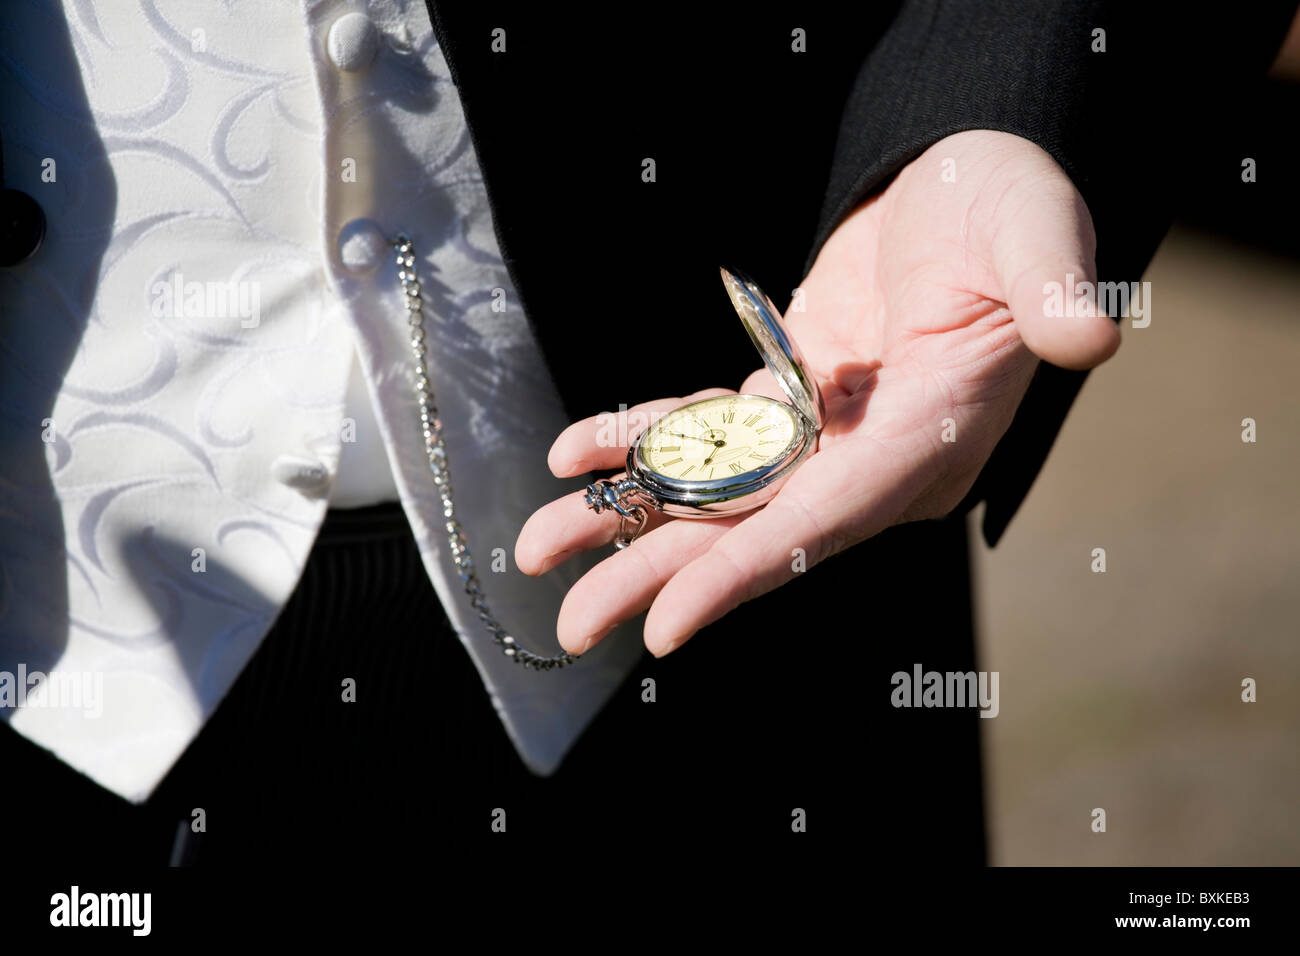 Groom with pocket watch waiting for the bride to arrive Stock Photo